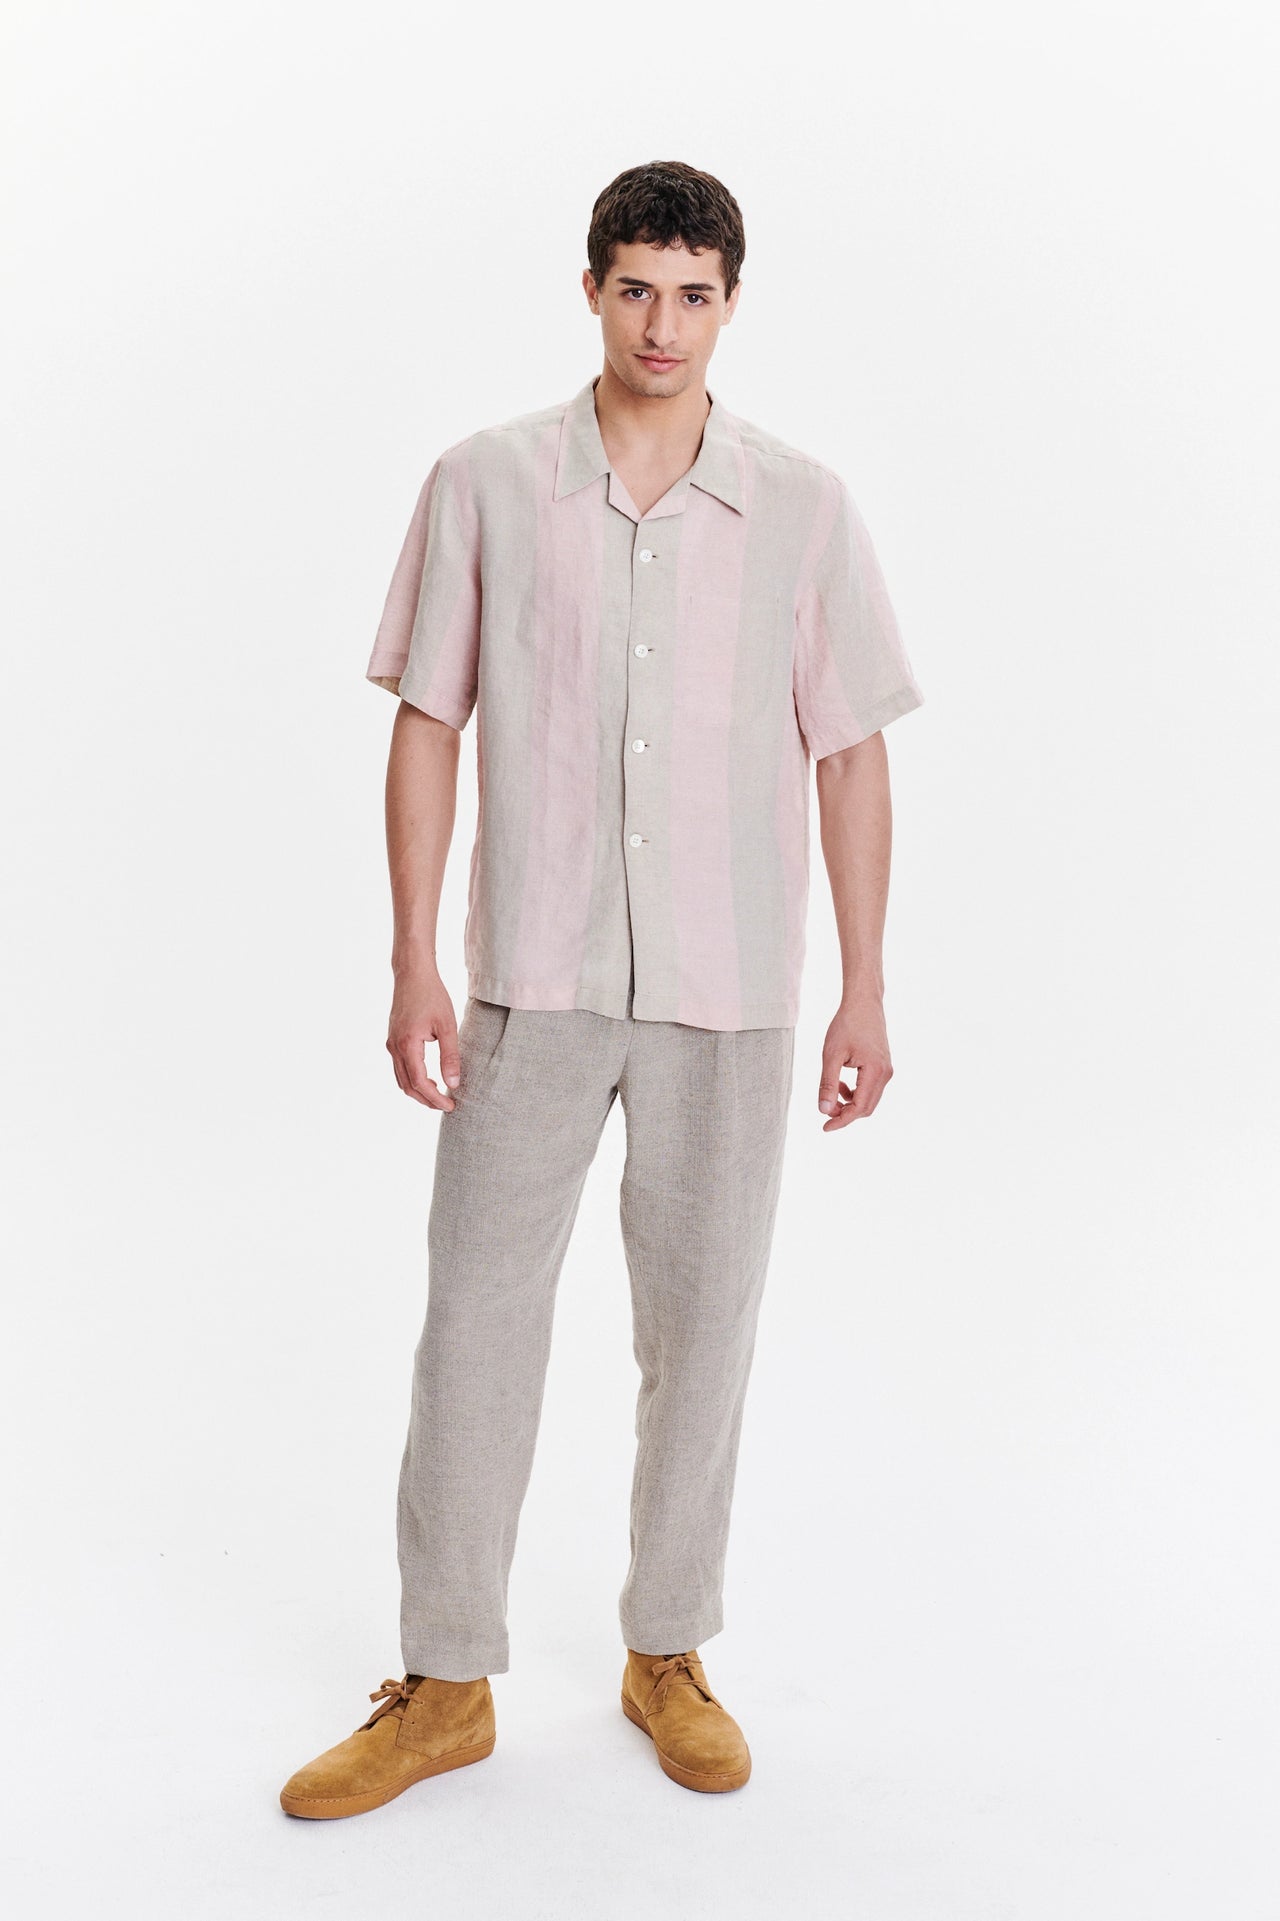 Short Sleeve Relaxed Cuban Collar Shirt in Tonal Pink and Beige Stripes of a Superb Italian Traceable Linen